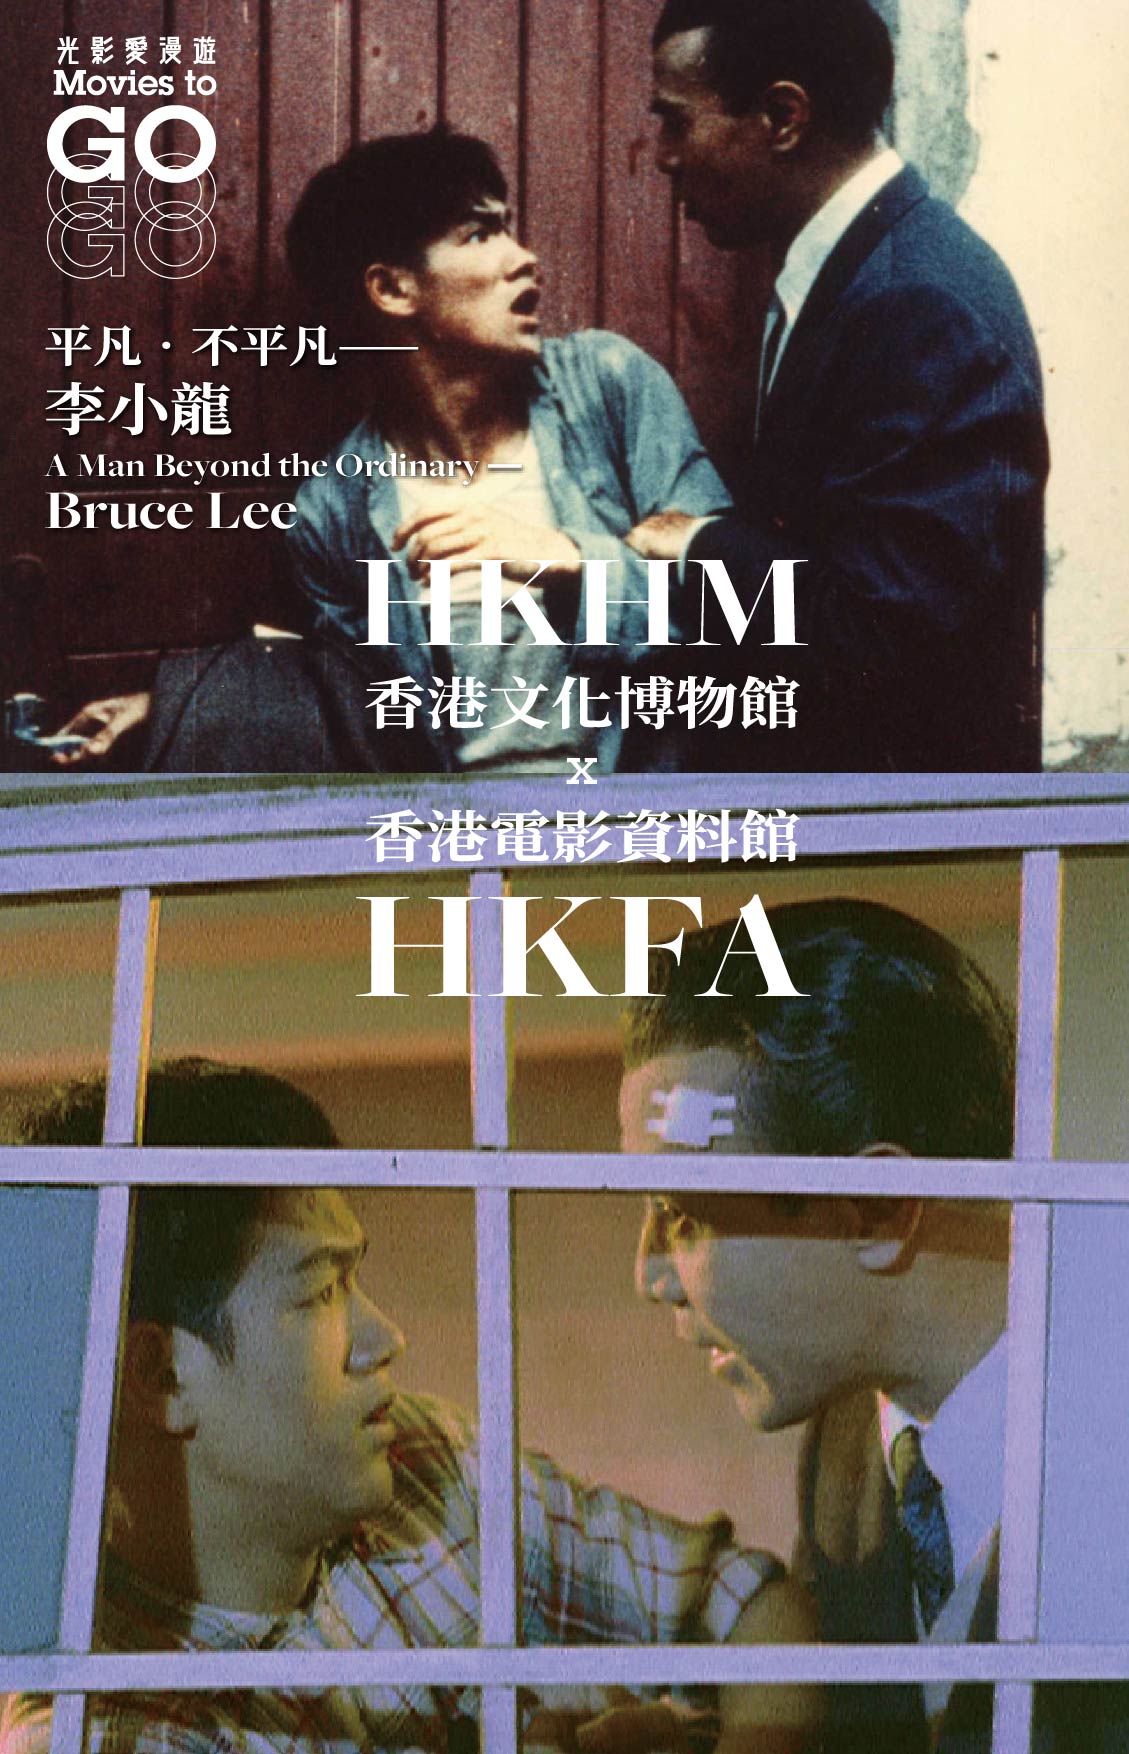 Movies to GO<br>HKHM x HKFA<br>A Man Beyond the Ordinary——Bruce Lee